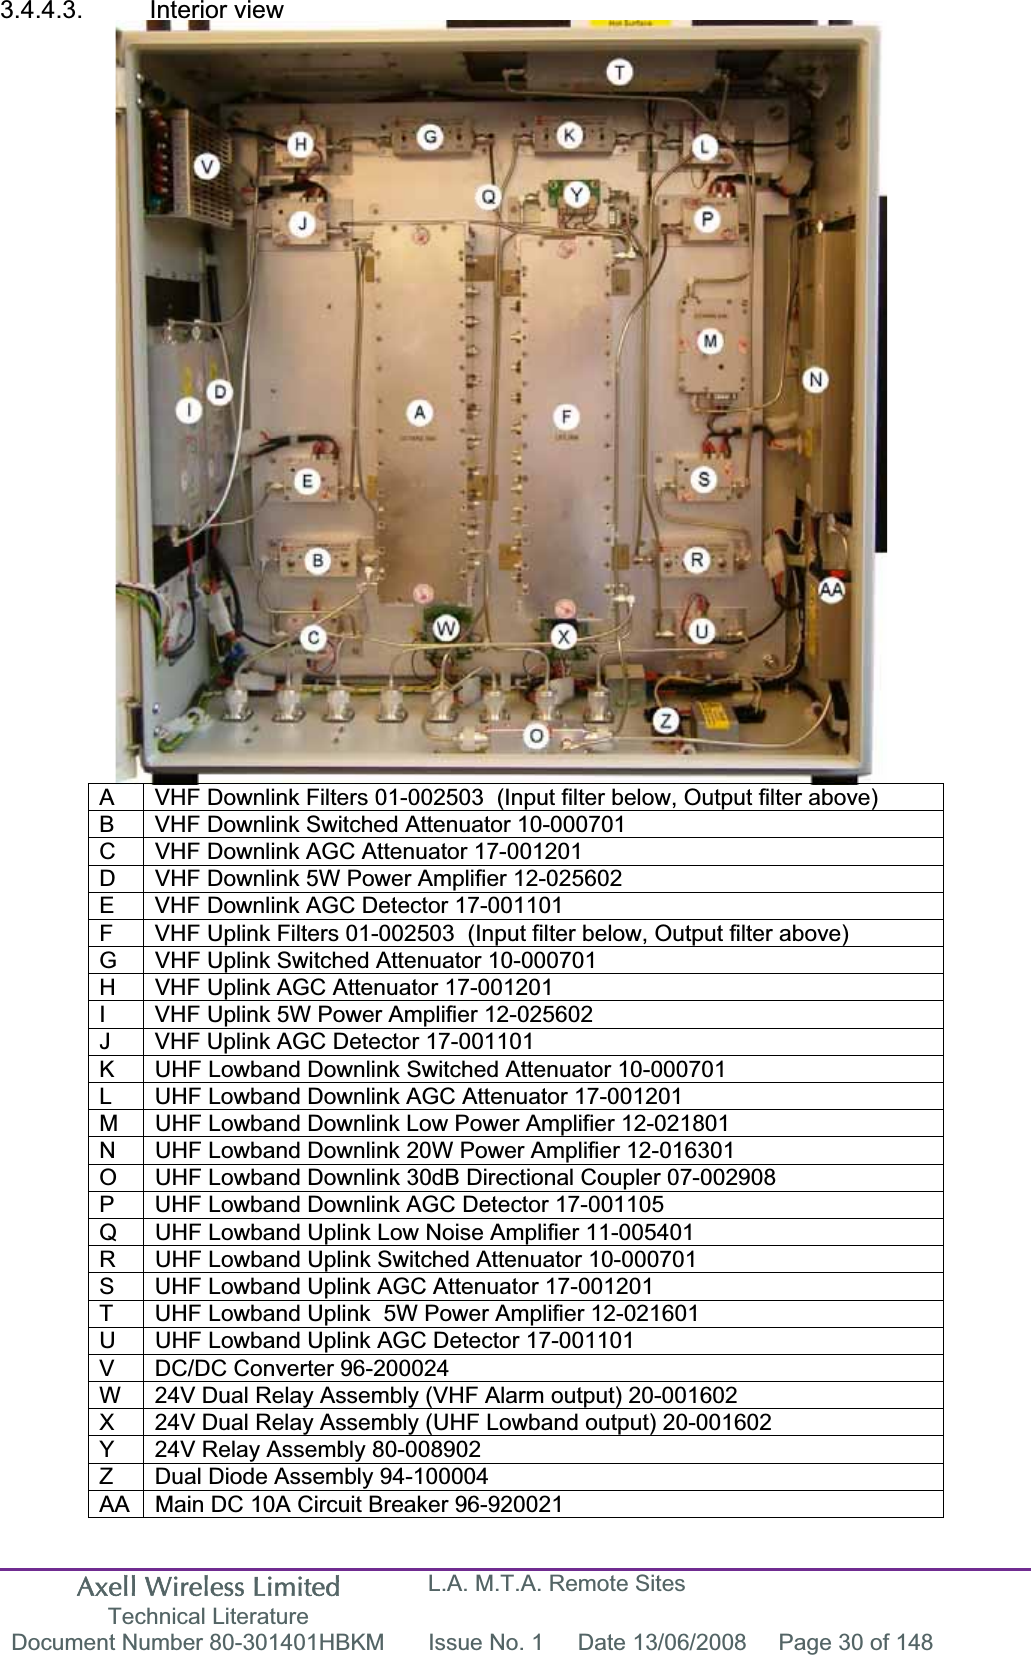 Axell Wireless Limited Technical Literature L.A. M.T.A. Remote Sites Document Number 80-301401HBKM  Issue No. 1  Date 13/06/2008  Page 30 of 148 3.4.4.3. Interior view A  VHF Downlink Filters 01-002503  (Input filter below, Output filter above)  B  VHF Downlink Switched Attenuator 10-000701 C  VHF Downlink AGC Attenuator 17-001201 D  VHF Downlink 5W Power Amplifier 12-025602 E  VHF Downlink AGC Detector 17-001101 F  VHF Uplink Filters 01-002503  (Input filter below, Output filter above) G  VHF Uplink Switched Attenuator 10-000701 H  VHF Uplink AGC Attenuator 17-001201 I  VHF Uplink 5W Power Amplifier 12-025602 J  VHF Uplink AGC Detector 17-001101 K  UHF Lowband Downlink Switched Attenuator 10-000701 L  UHF Lowband Downlink AGC Attenuator 17-001201 M  UHF Lowband Downlink Low Power Amplifier 12-021801 N  UHF Lowband Downlink 20W Power Amplifier 12-016301 O  UHF Lowband Downlink 30dB Directional Coupler 07-002908 P  UHF Lowband Downlink AGC Detector 17-001105 Q  UHF Lowband Uplink Low Noise Amplifier 11-005401 R  UHF Lowband Uplink Switched Attenuator 10-000701 S  UHF Lowband Uplink AGC Attenuator 17-001201 T  UHF Lowband Uplink  5W Power Amplifier 12-021601 U  UHF Lowband Uplink AGC Detector 17-001101 V  DC/DC Converter 96-200024 W  24V Dual Relay Assembly (VHF Alarm output) 20-001602 X  24V Dual Relay Assembly (UHF Lowband output) 20-001602 Y  24V Relay Assembly 80-008902 Z  Dual Diode Assembly 94-100004 AA  Main DC 10A Circuit Breaker 96-920021 